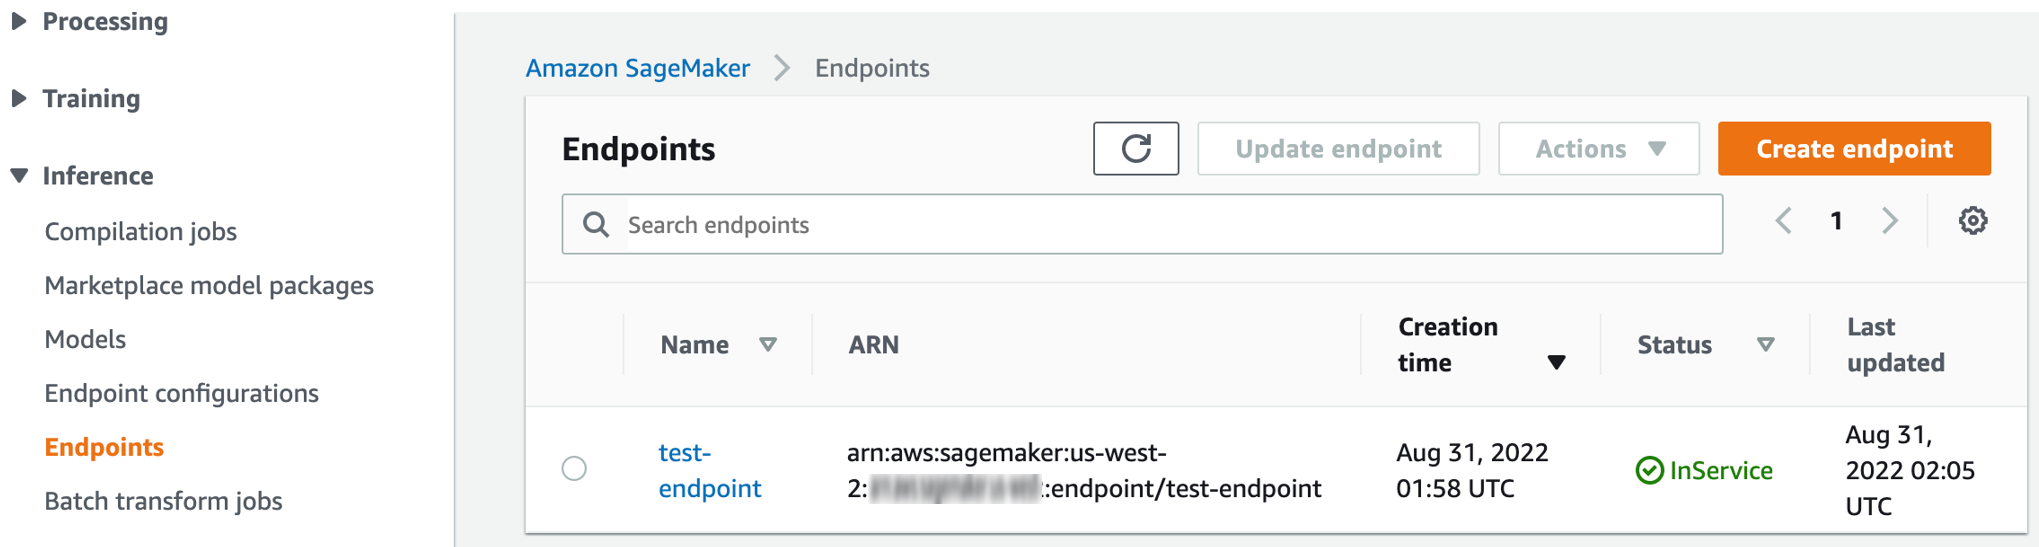 SageMaker console: Endpoints page to create an endpoint or check endpoint status.